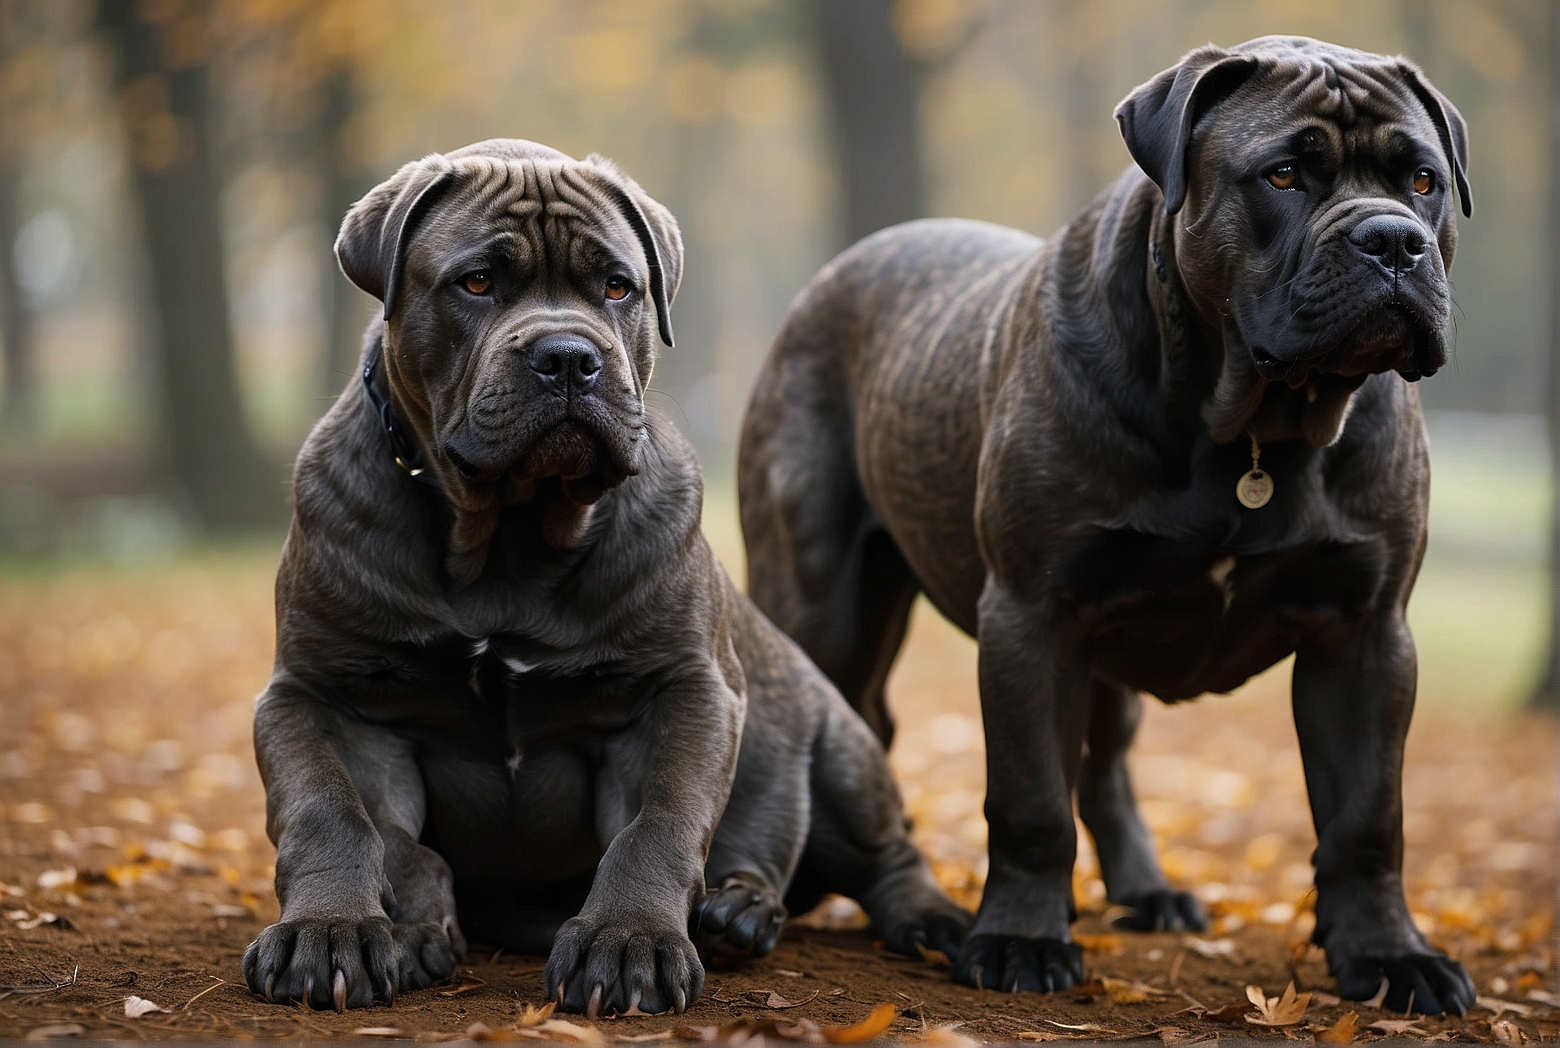 Can a Cane Corso turn on its owner?